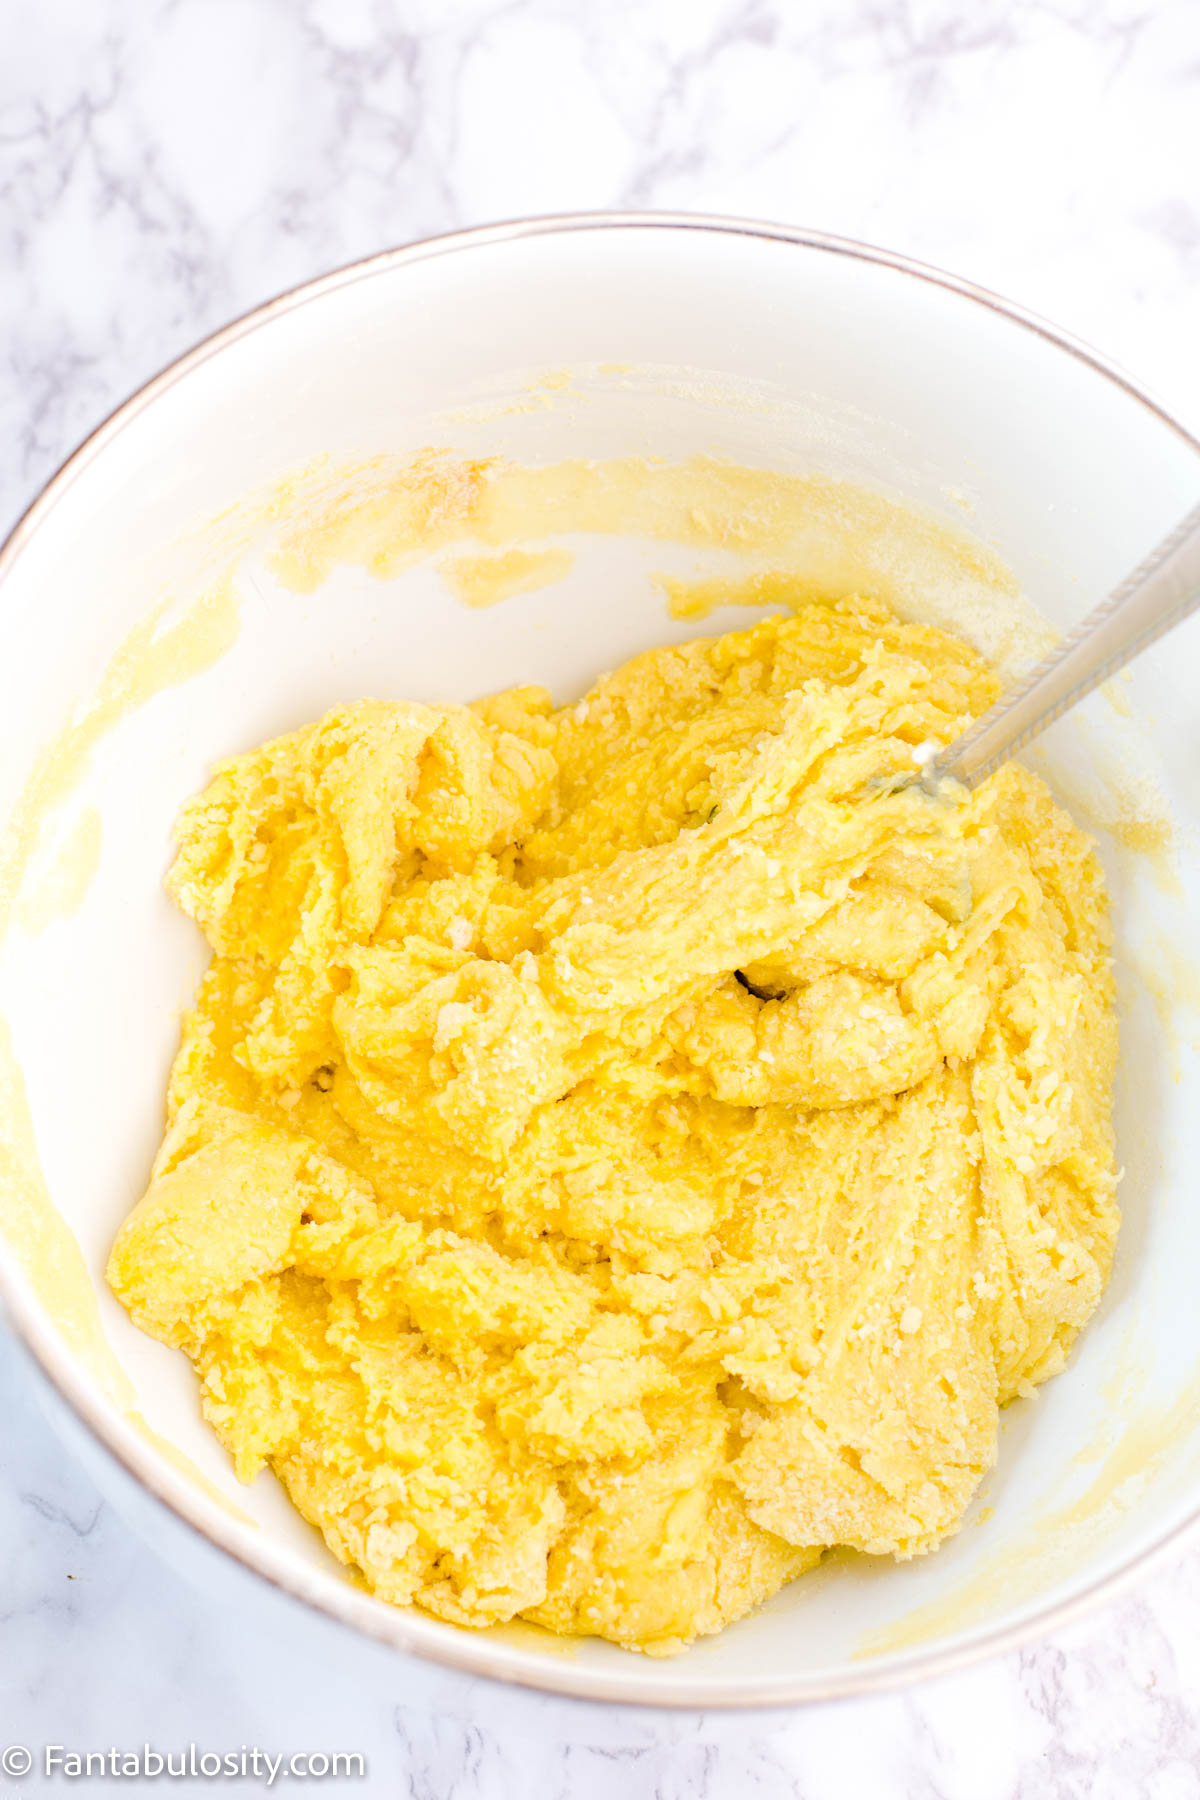 Mix cake mix with oil, eggs and vanilla